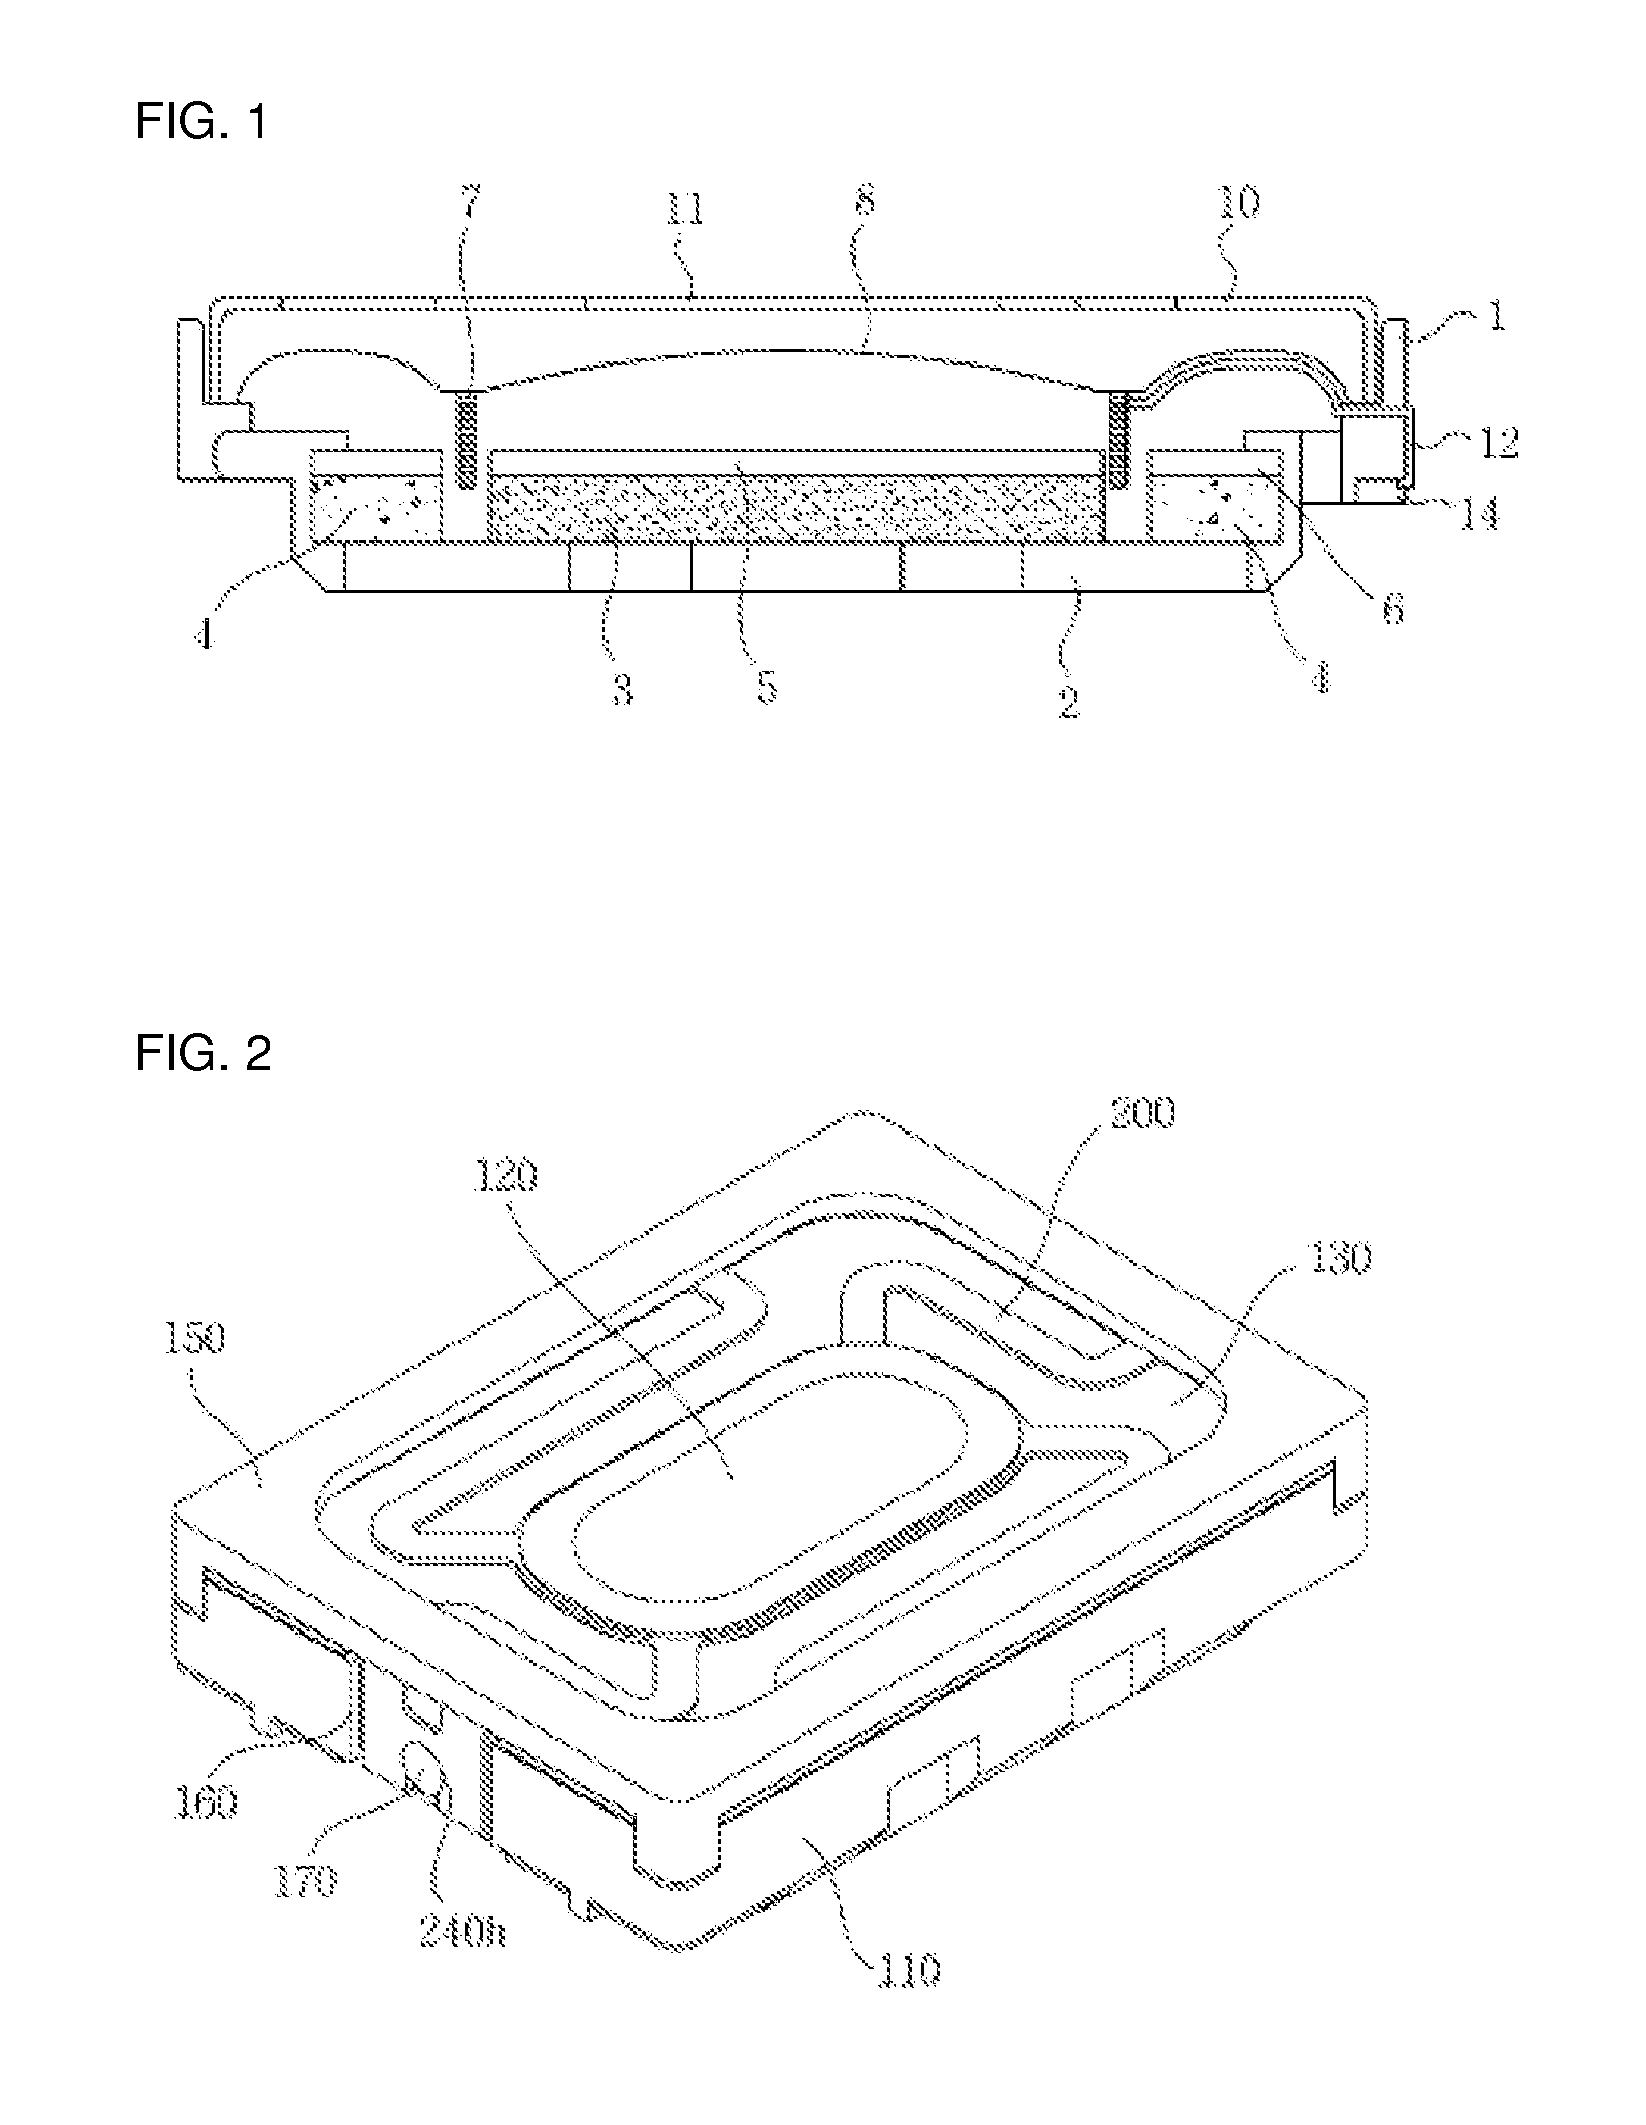 Acoustic transducer device